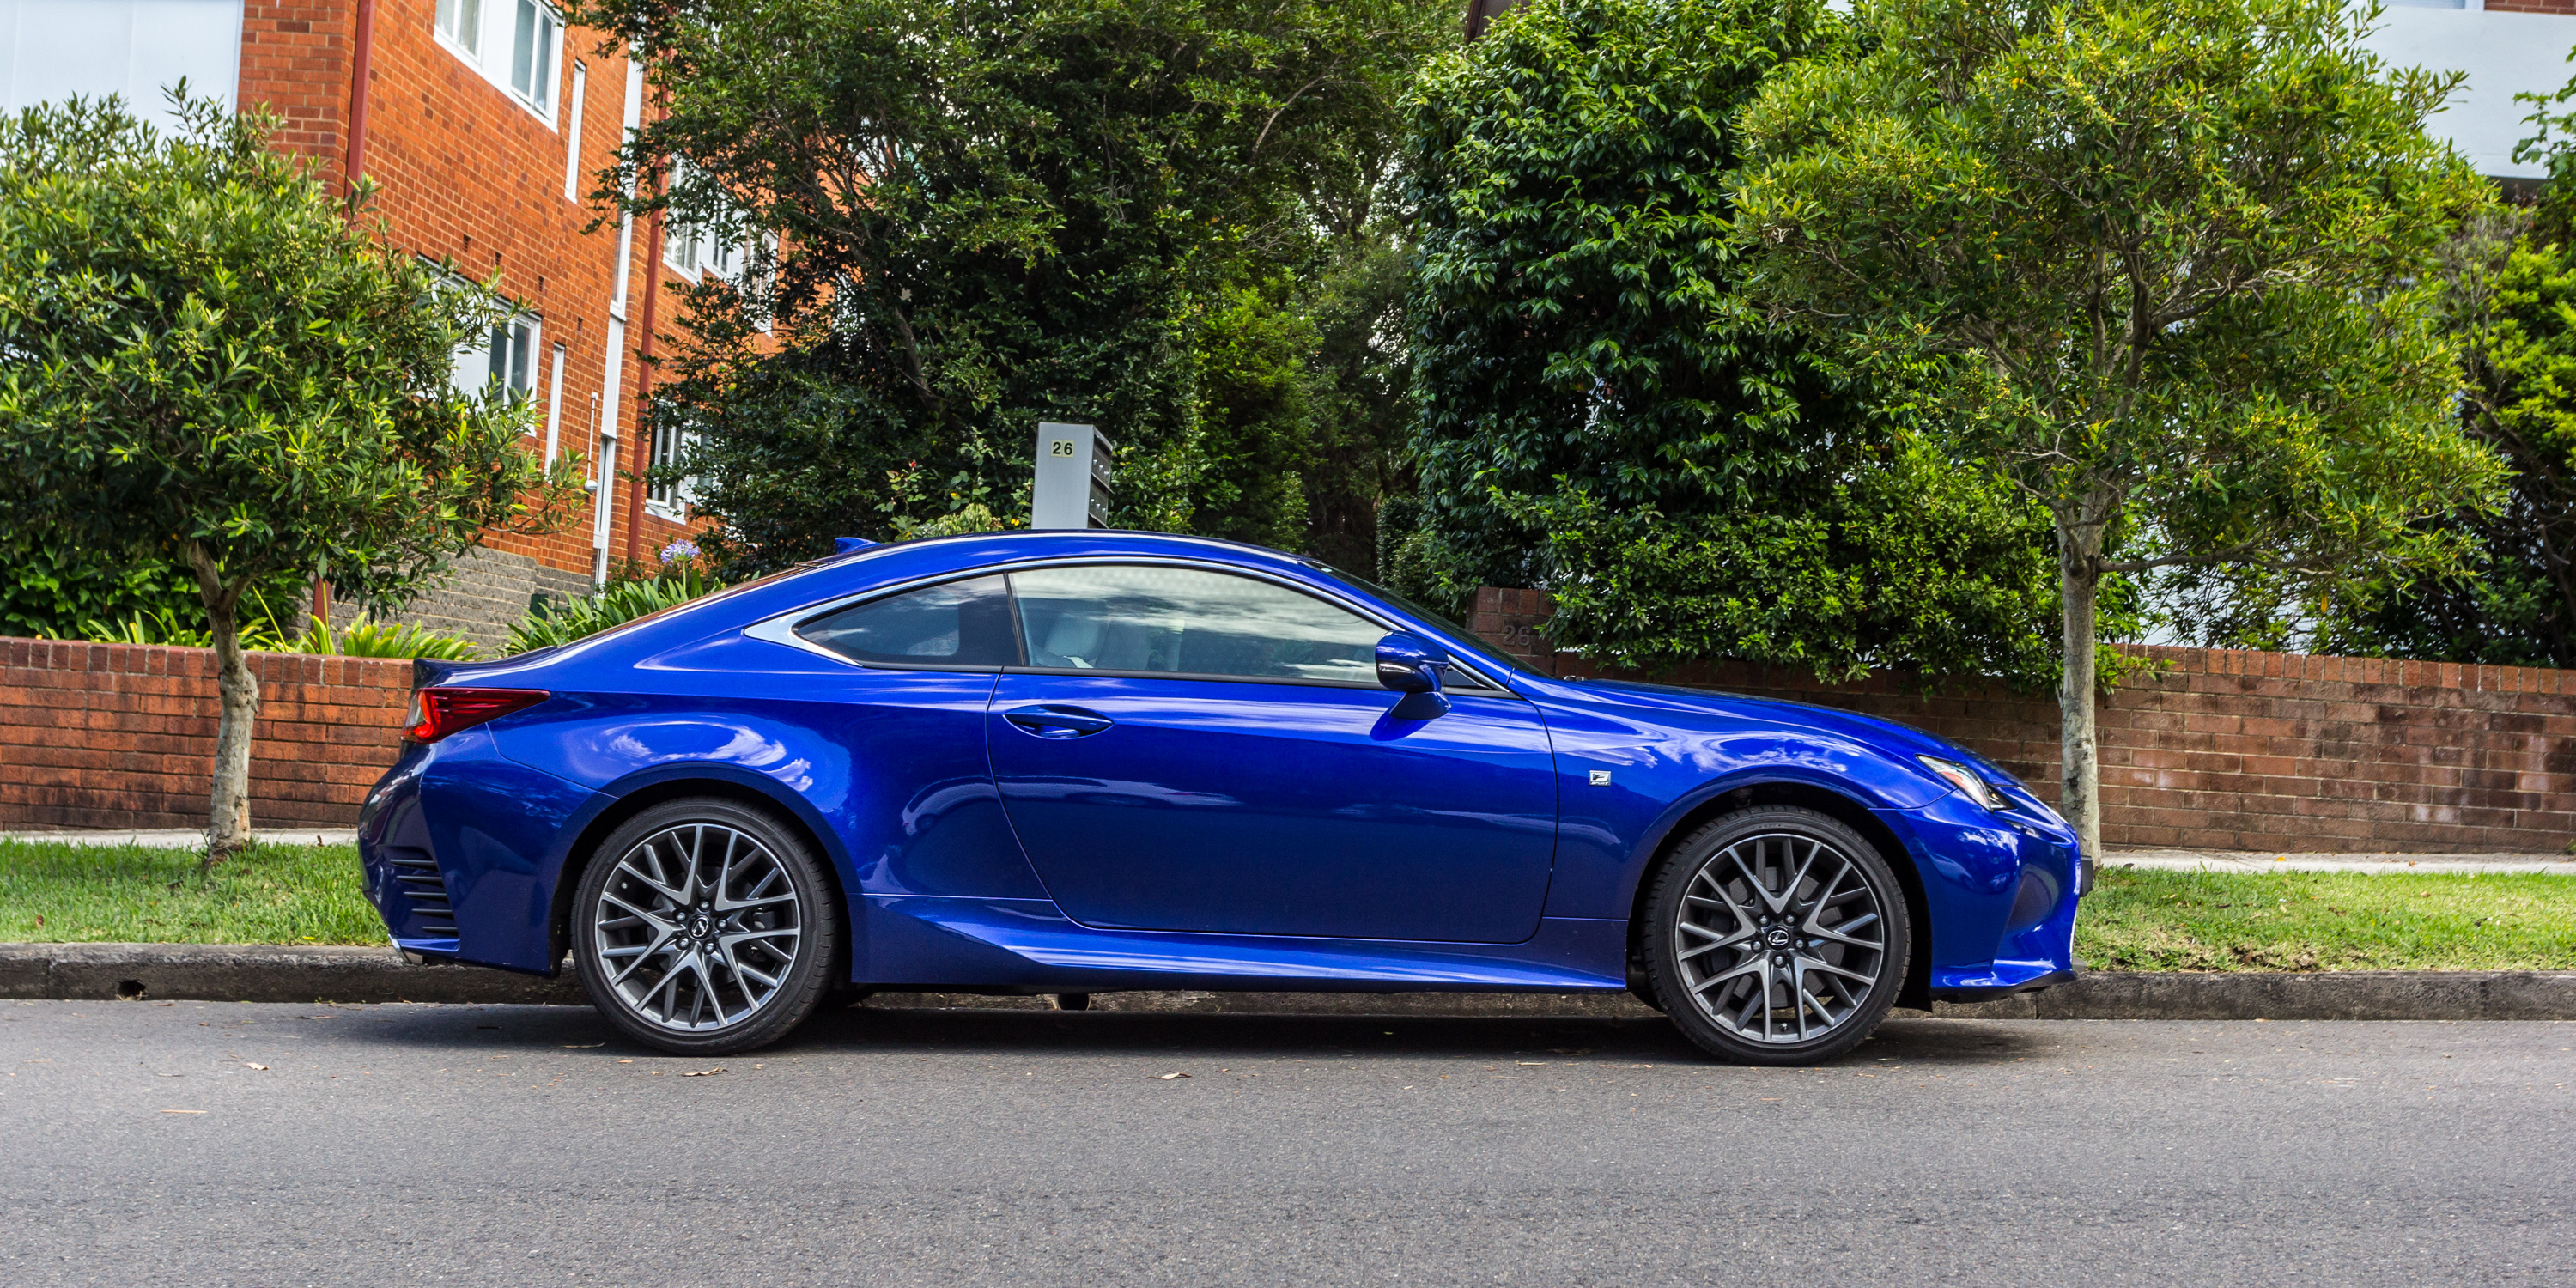 32 HQ Photos Rc F Sport Price : 2016 Lexus RC-F Archives - The Truth About Cars